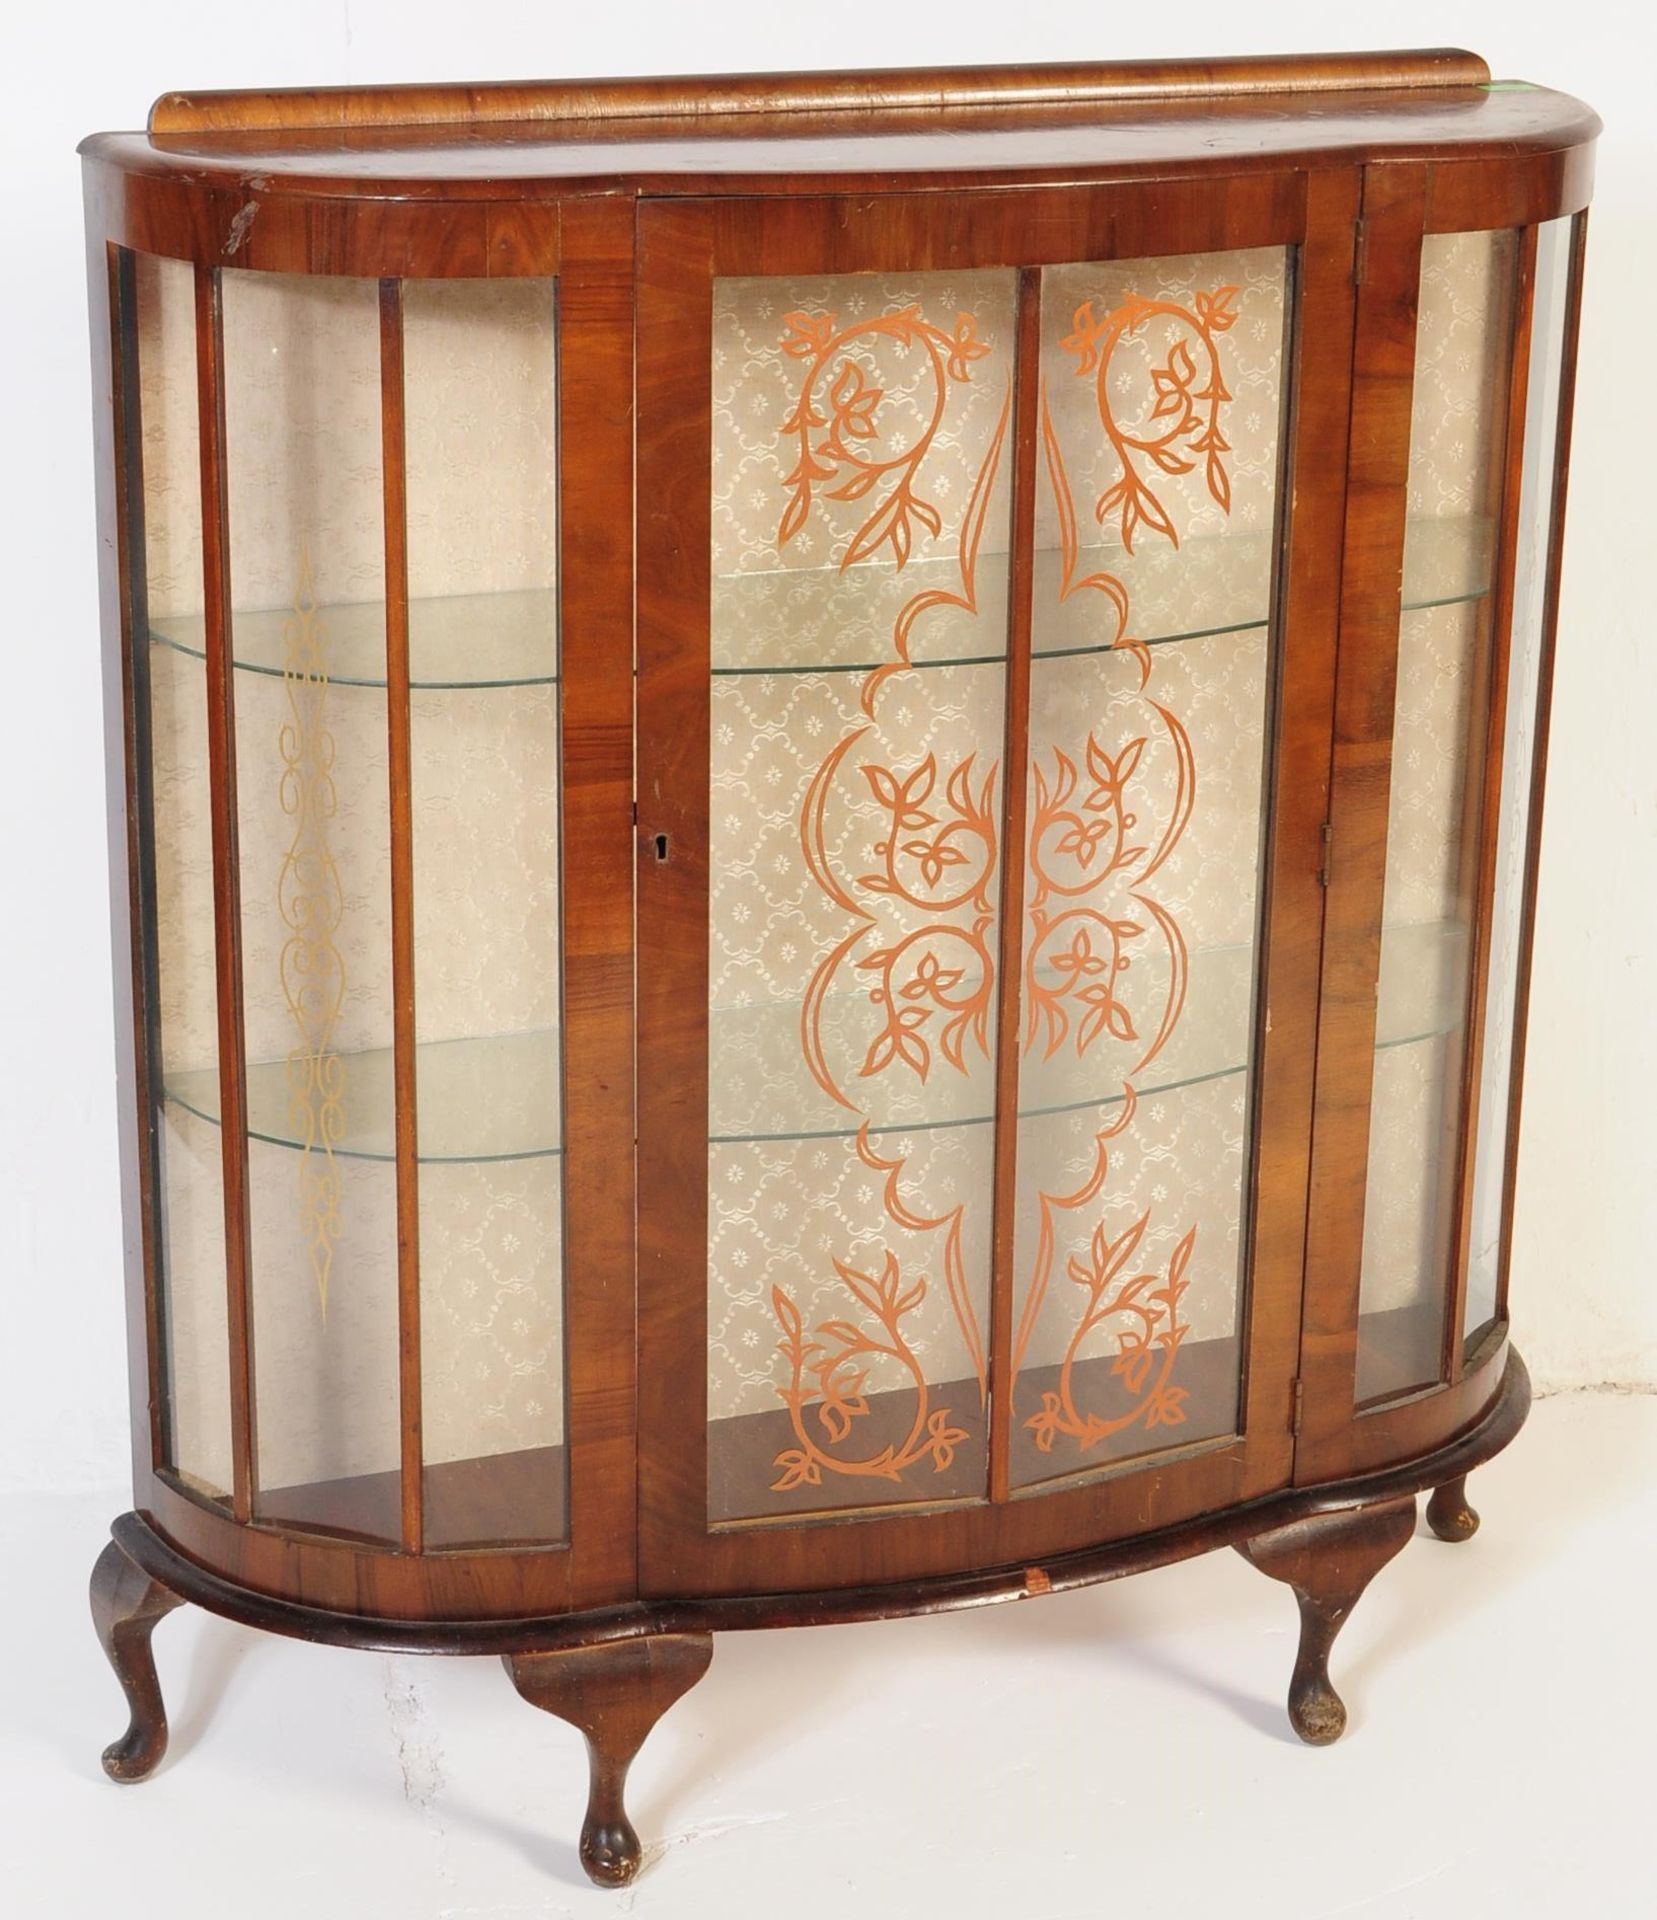 1950S QUEEN ANNE REVIVAL WALNUT CHINA DISPLAY CABINET - Image 2 of 6